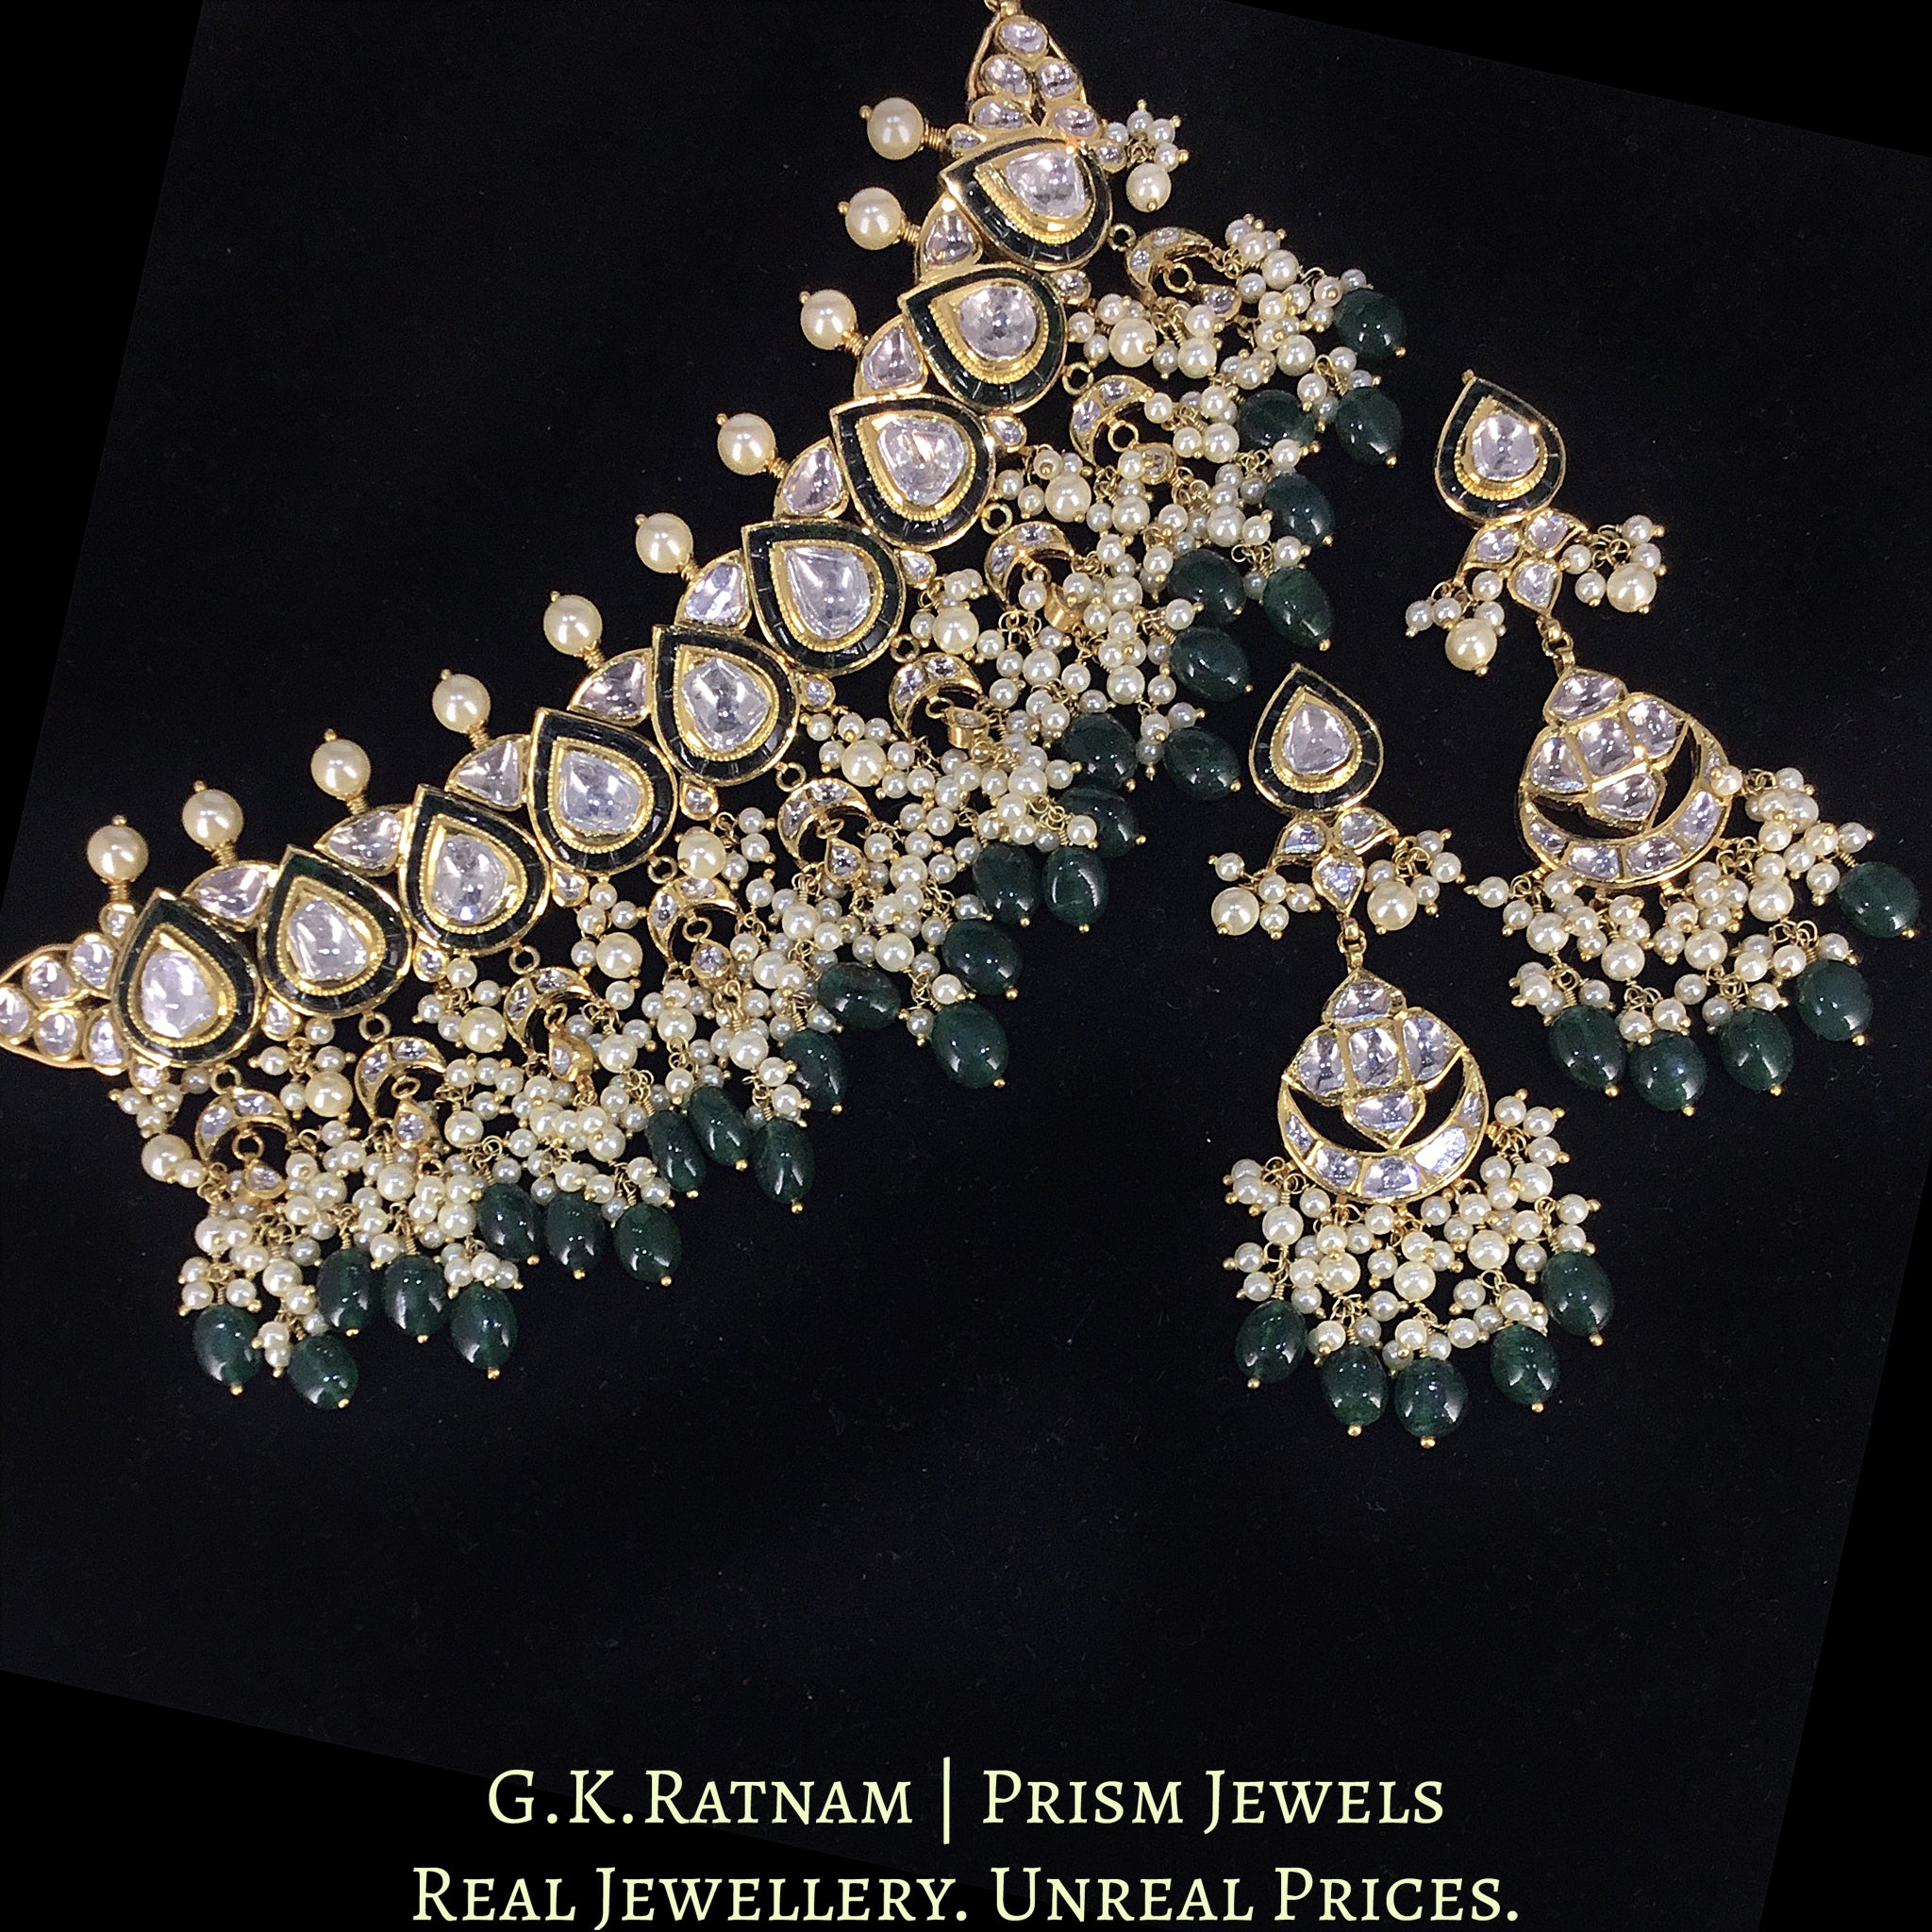 18k Gold and Diamond Polki Choker Necklace Set with pear-shaped motifs enhanced by emerald-grade Beryls and Pearls